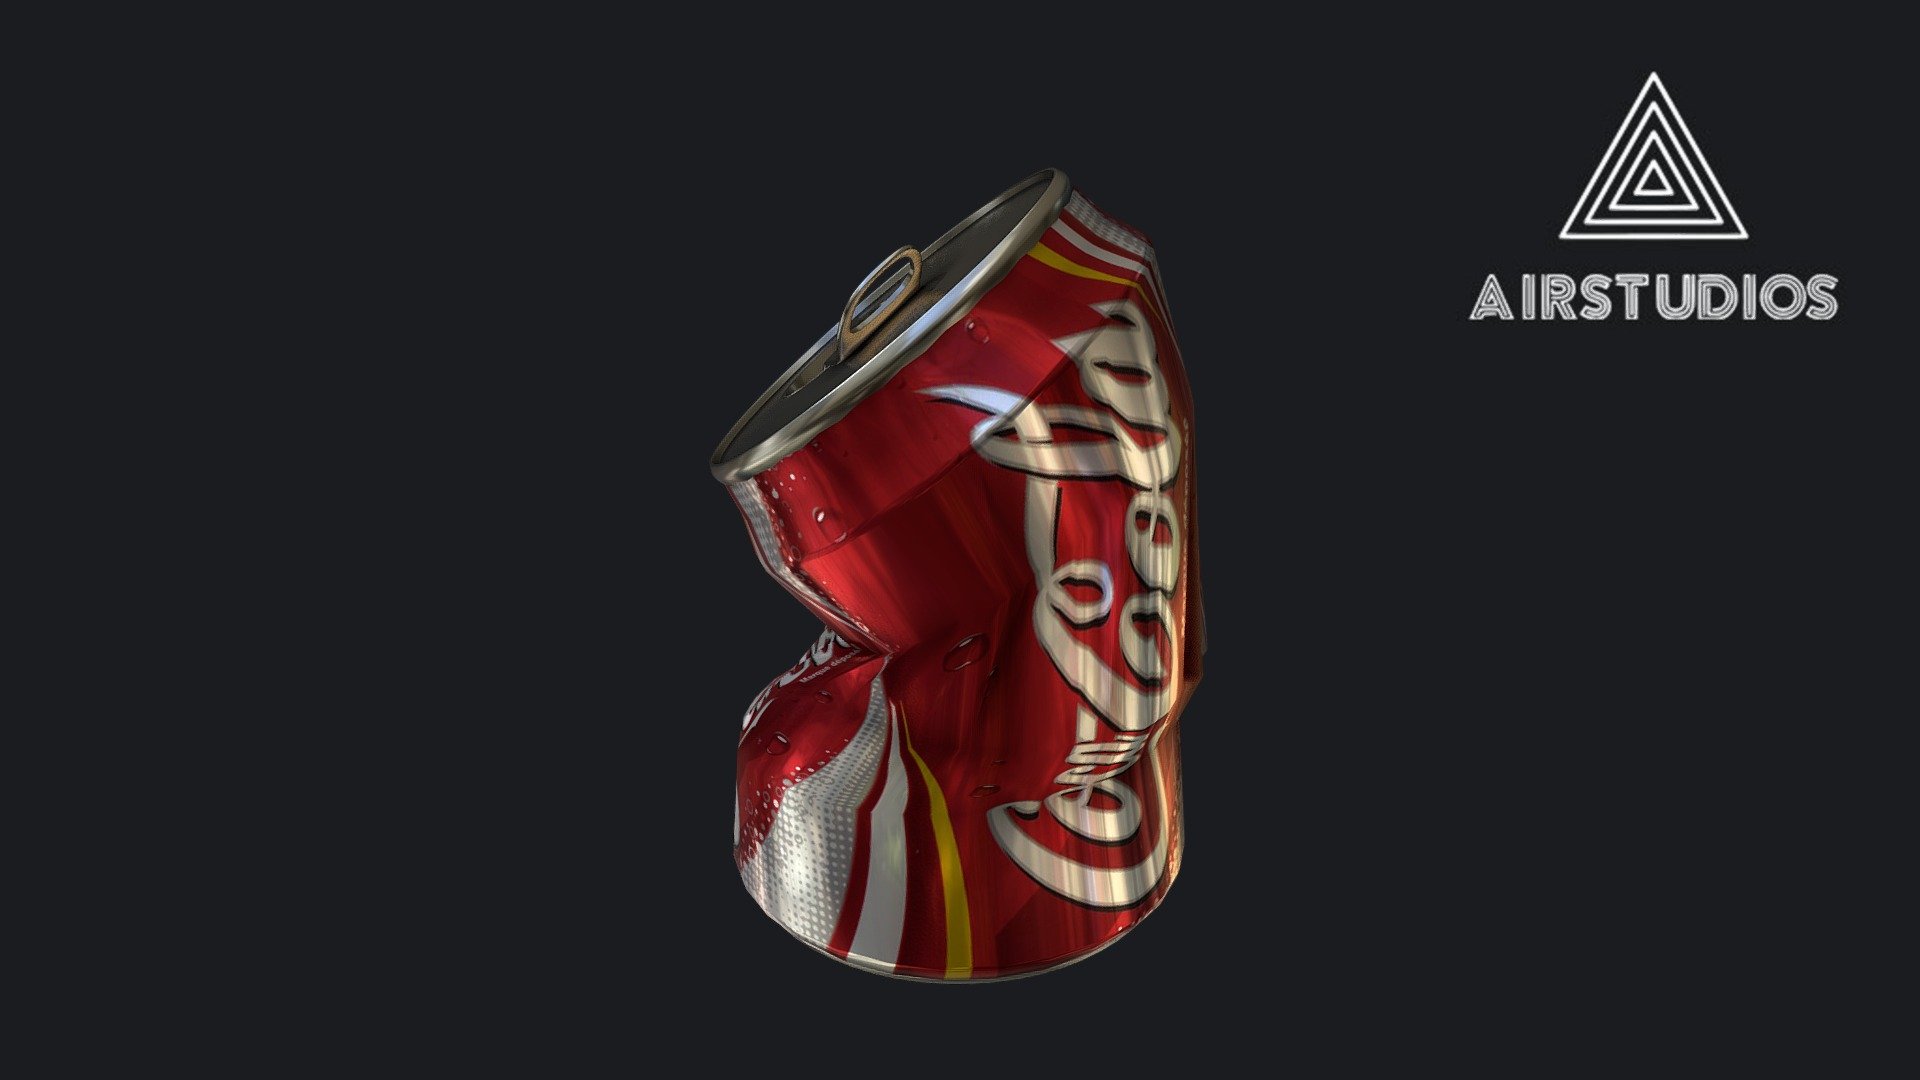 Busted Coca Cola Can
Made in Maya - Busted Coca Cola Can - Buy Royalty Free 3D model by AirStudios (@sebbe613) 3d model